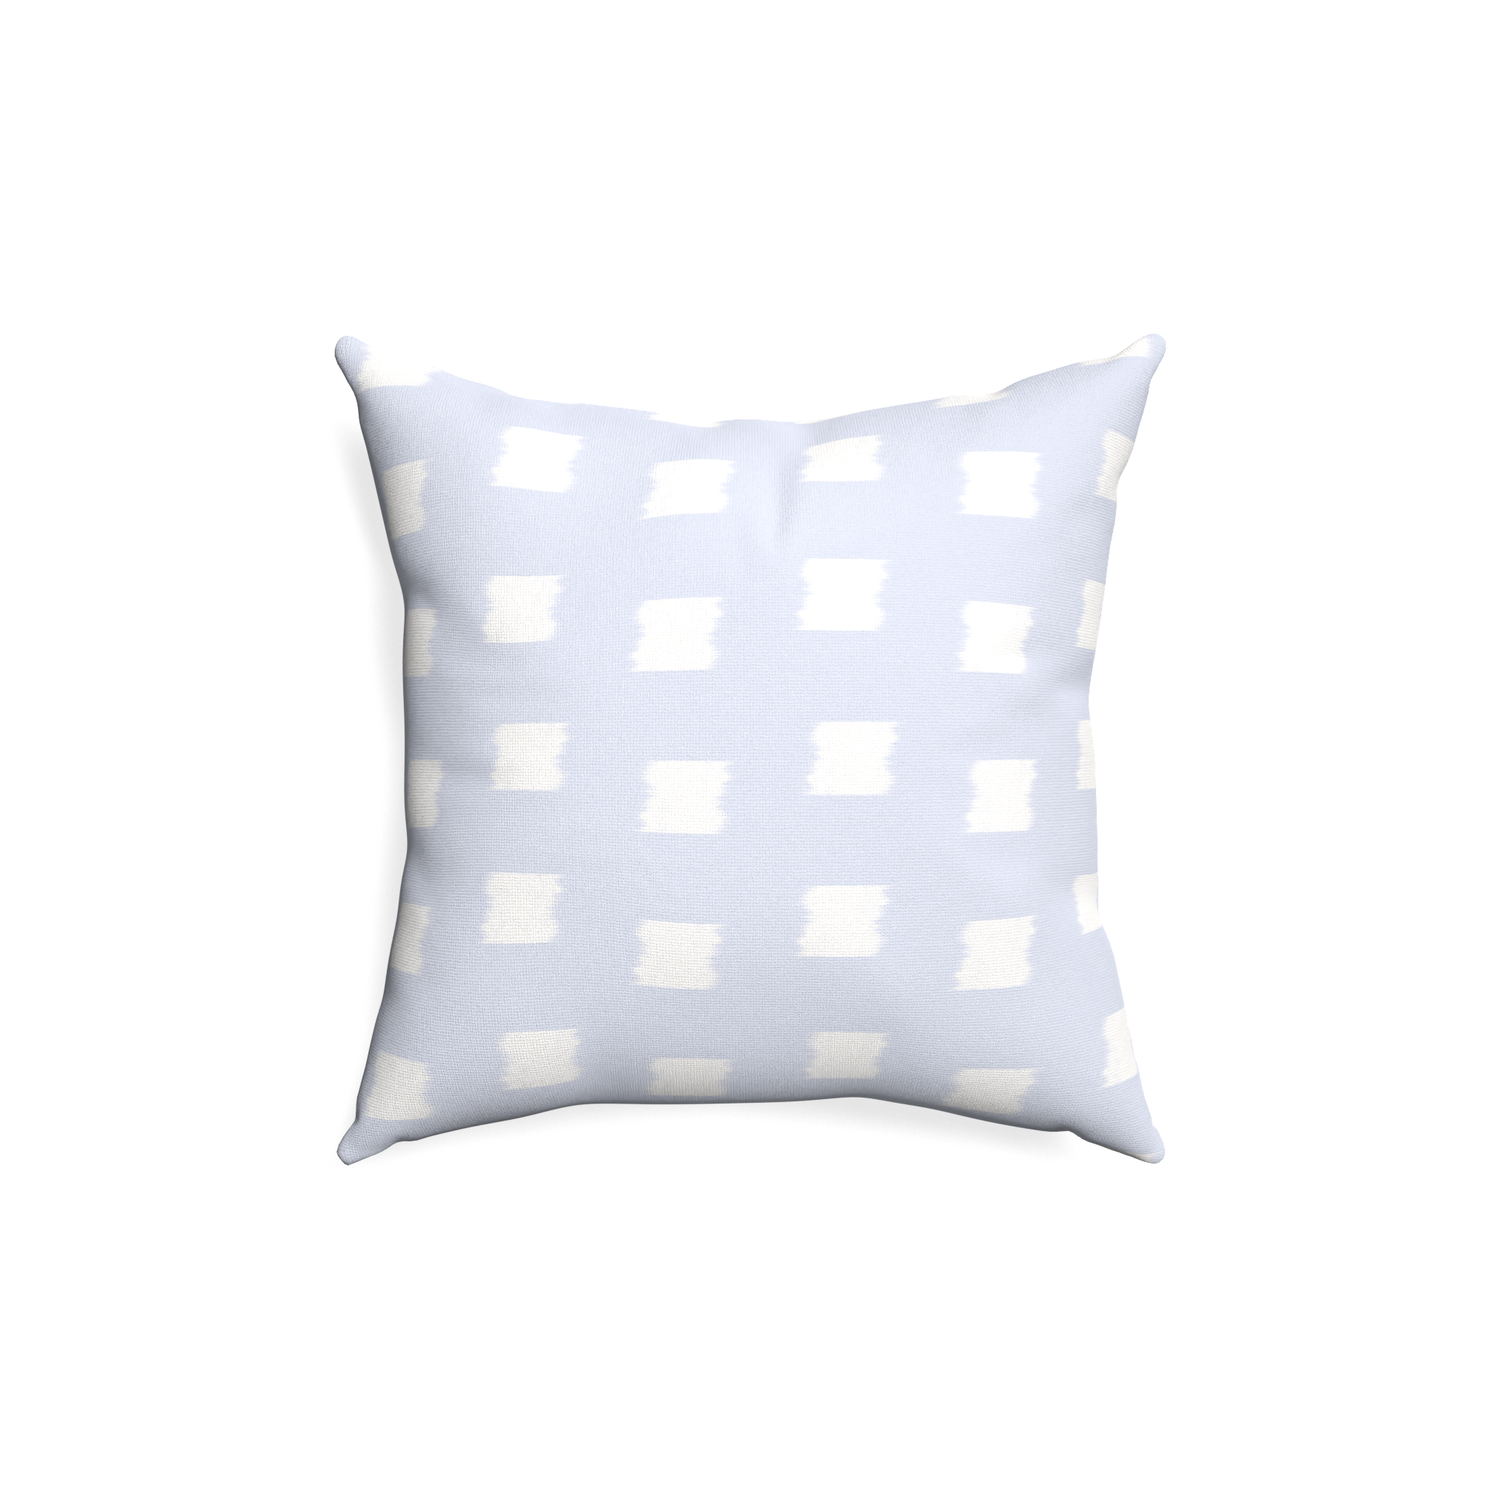 18-square denton custom pillow with none on white background